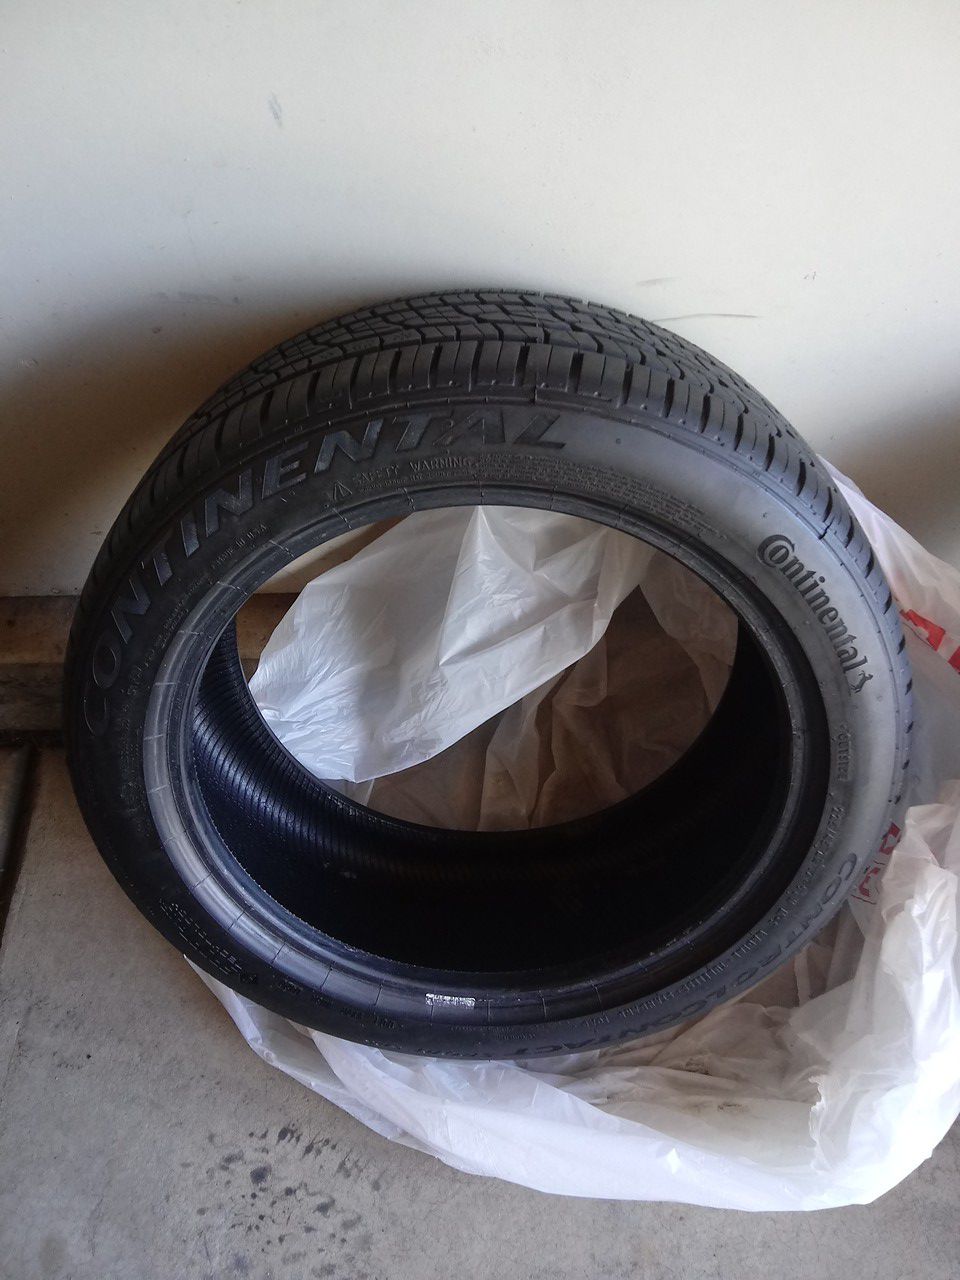 2 new run flat Continental Control Contact Sport SR5 tires 9/32 tread excellent condition no repairs or damage 225/45/17